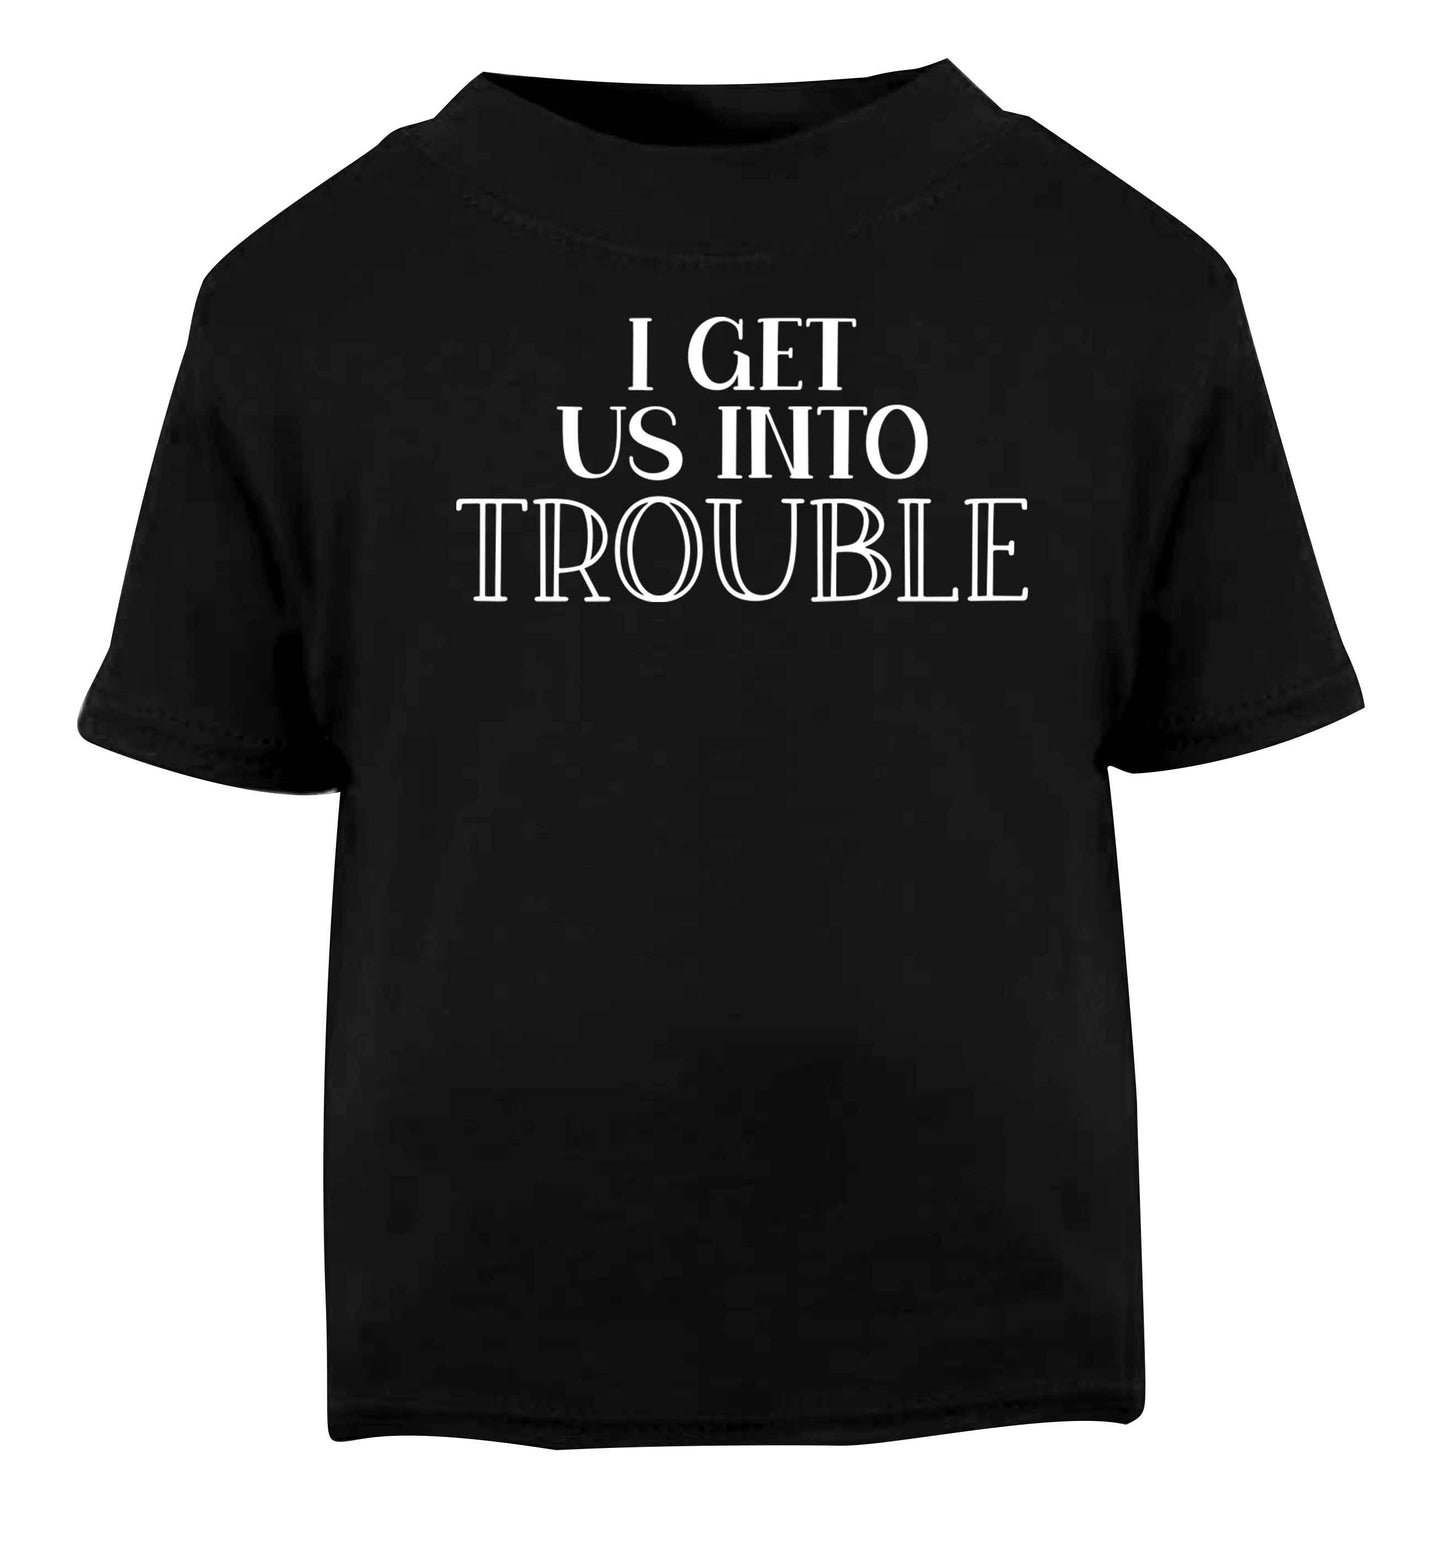 I get us into trouble Black baby toddler Tshirt 2 years